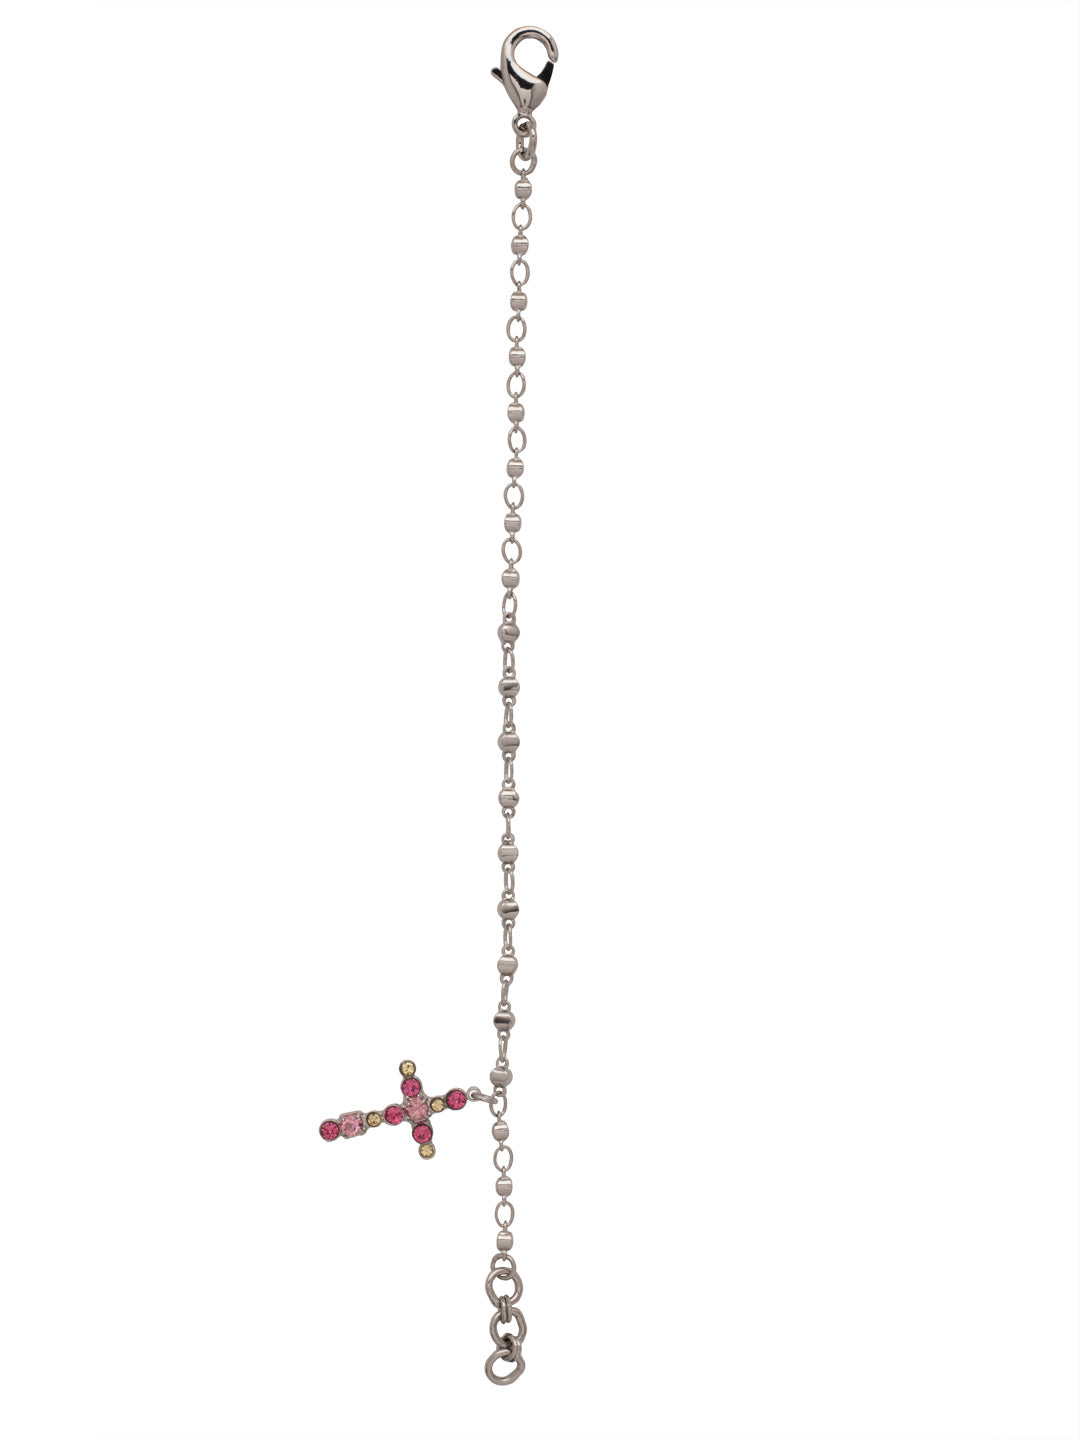 Miley Cross Charm Bracelet - BEX2PDPPN - <p>The Miley Cross Charm Bracelet features a crystal cross charm on a decorative link chain, perfect for wearing alone or layered with other bracelets. From Sorrelli's Pink Pineapple collection in our Palladium finish.</p>